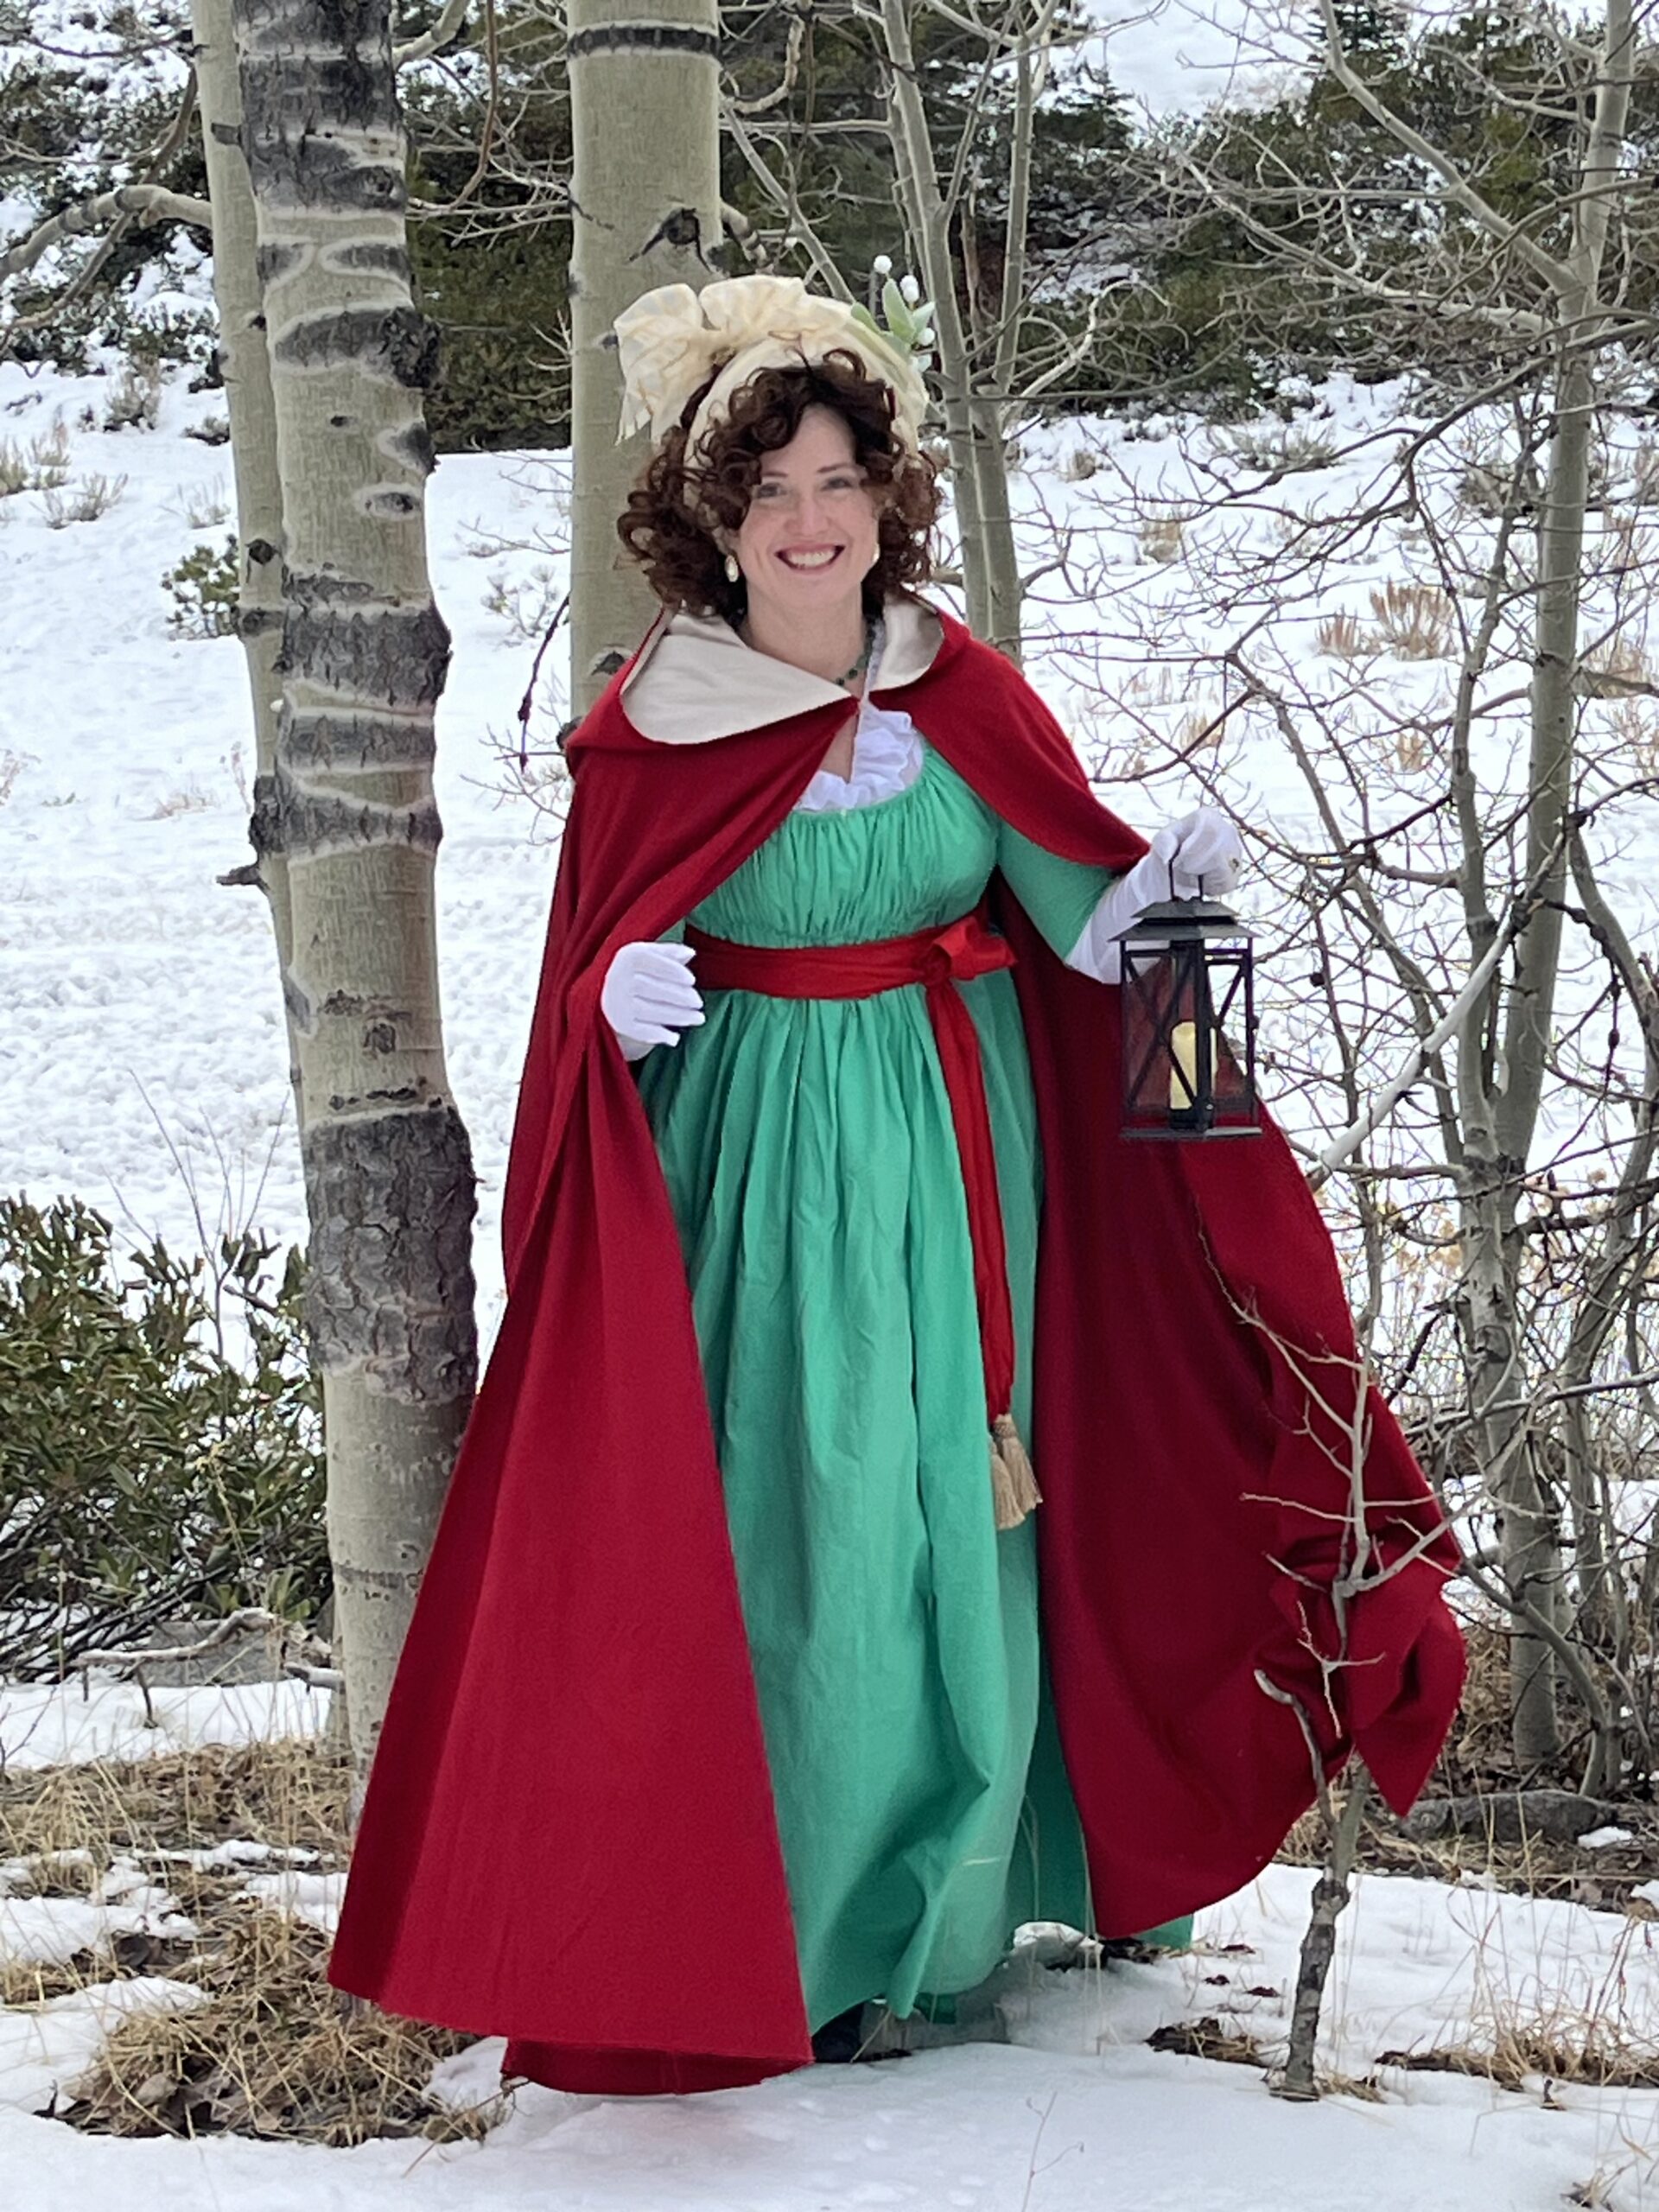 Tabubilgirl wears a 1790s New Year ensemble - a green 1790s New Year gown and red cardinal cloak. She carries a lantern